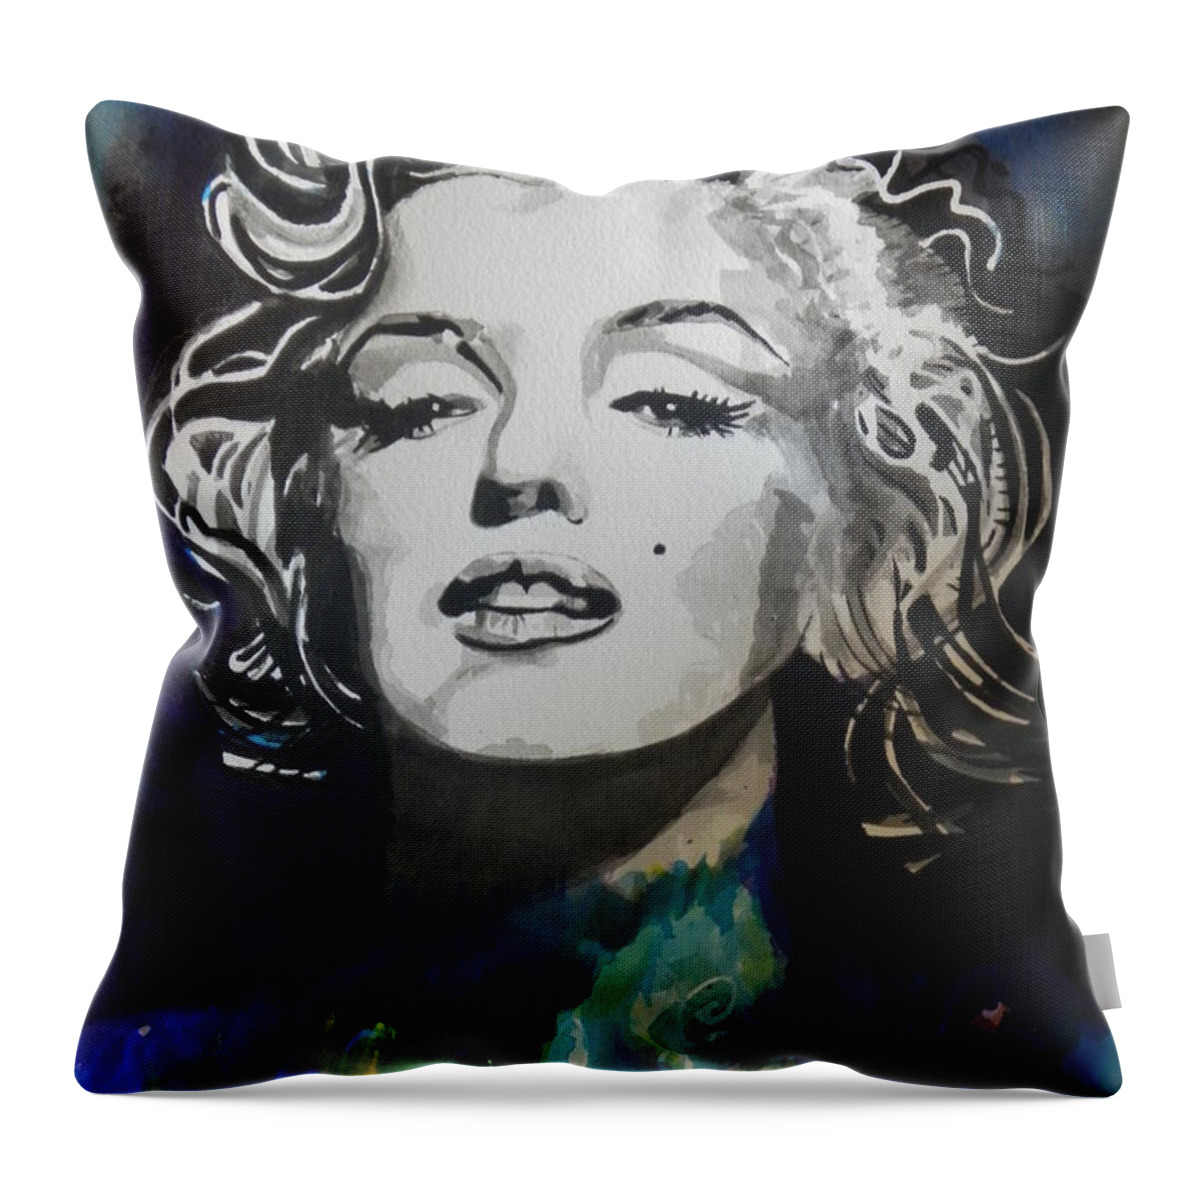 Watercolor Painting Throw Pillow featuring the painting Marilyn Monroe..2 by Chrisann Ellis